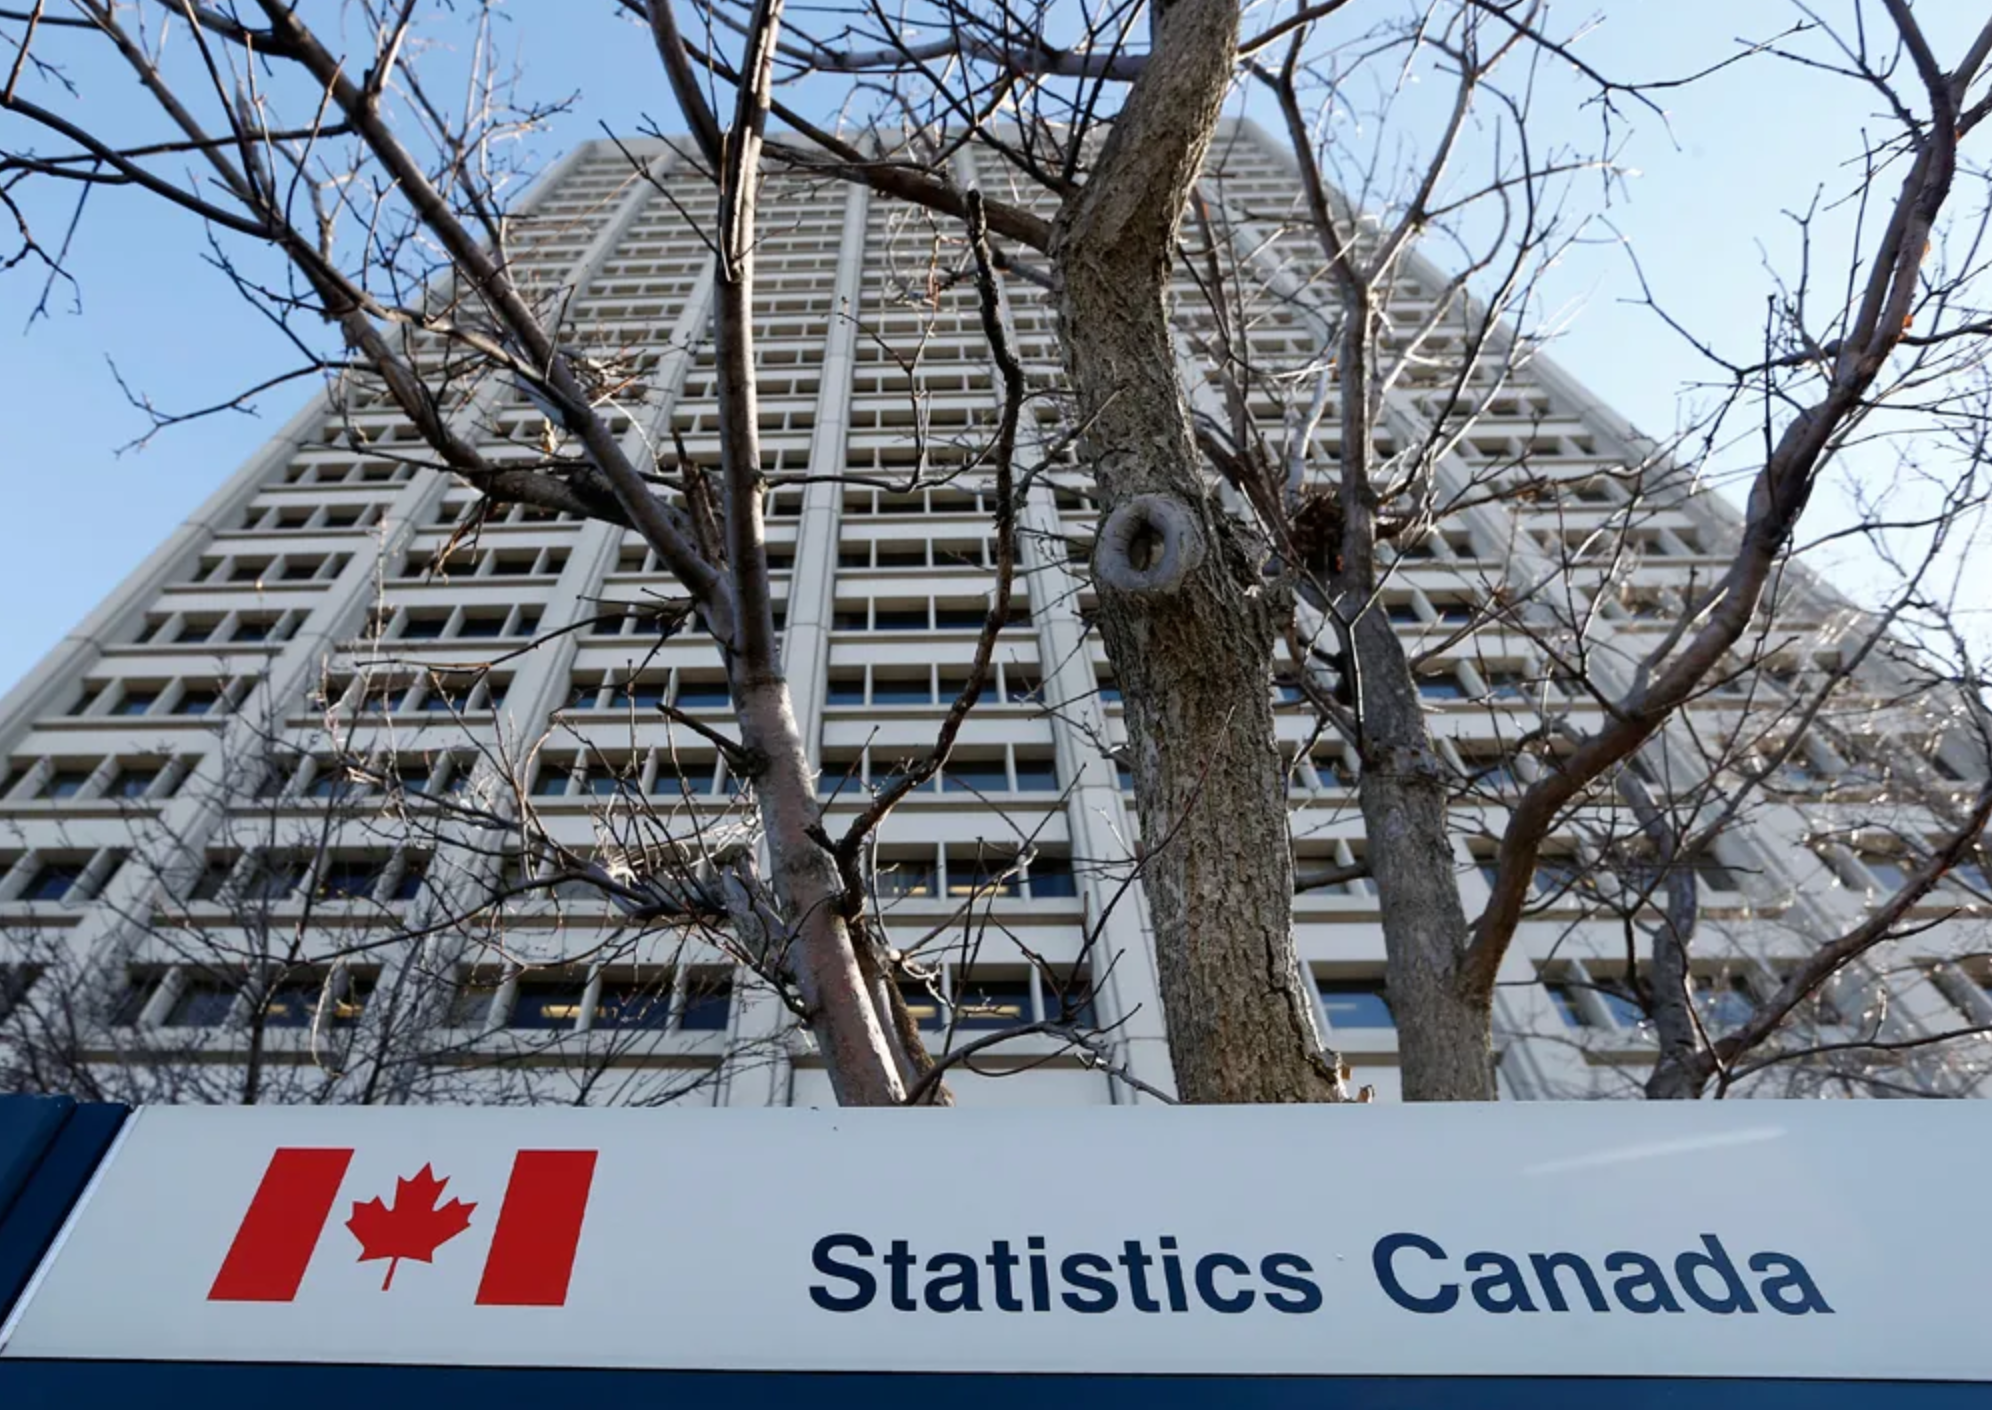 The Canadian economy lost 68 thousand jobs in May